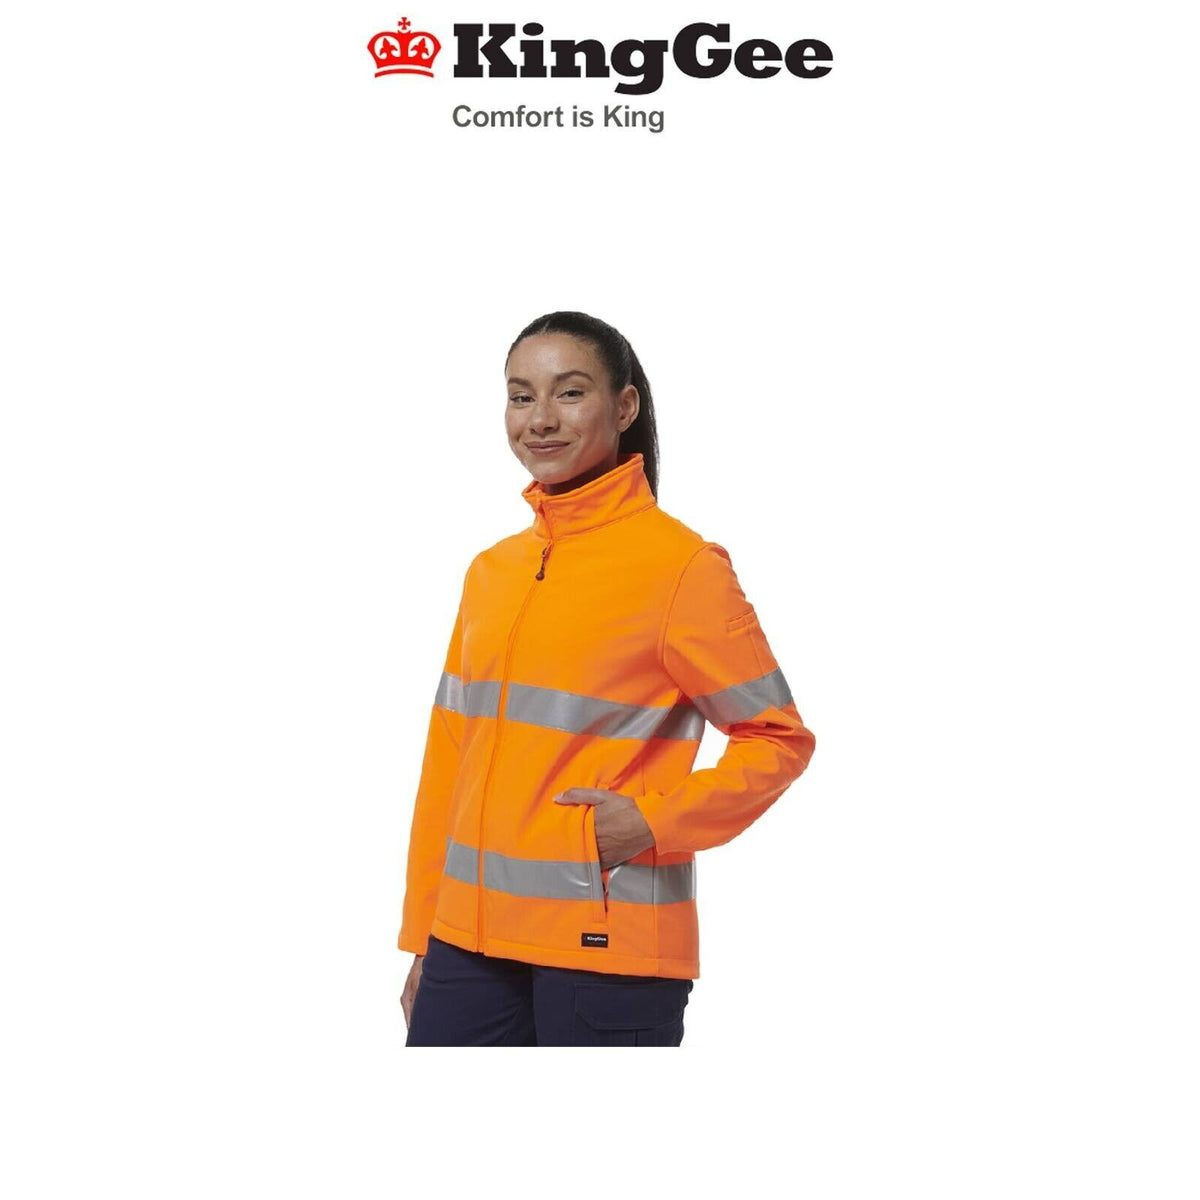 KingGee Womens Reflective Stretch Softshell Pocket Safety Work Jacket K45007-Collins Clothing Co